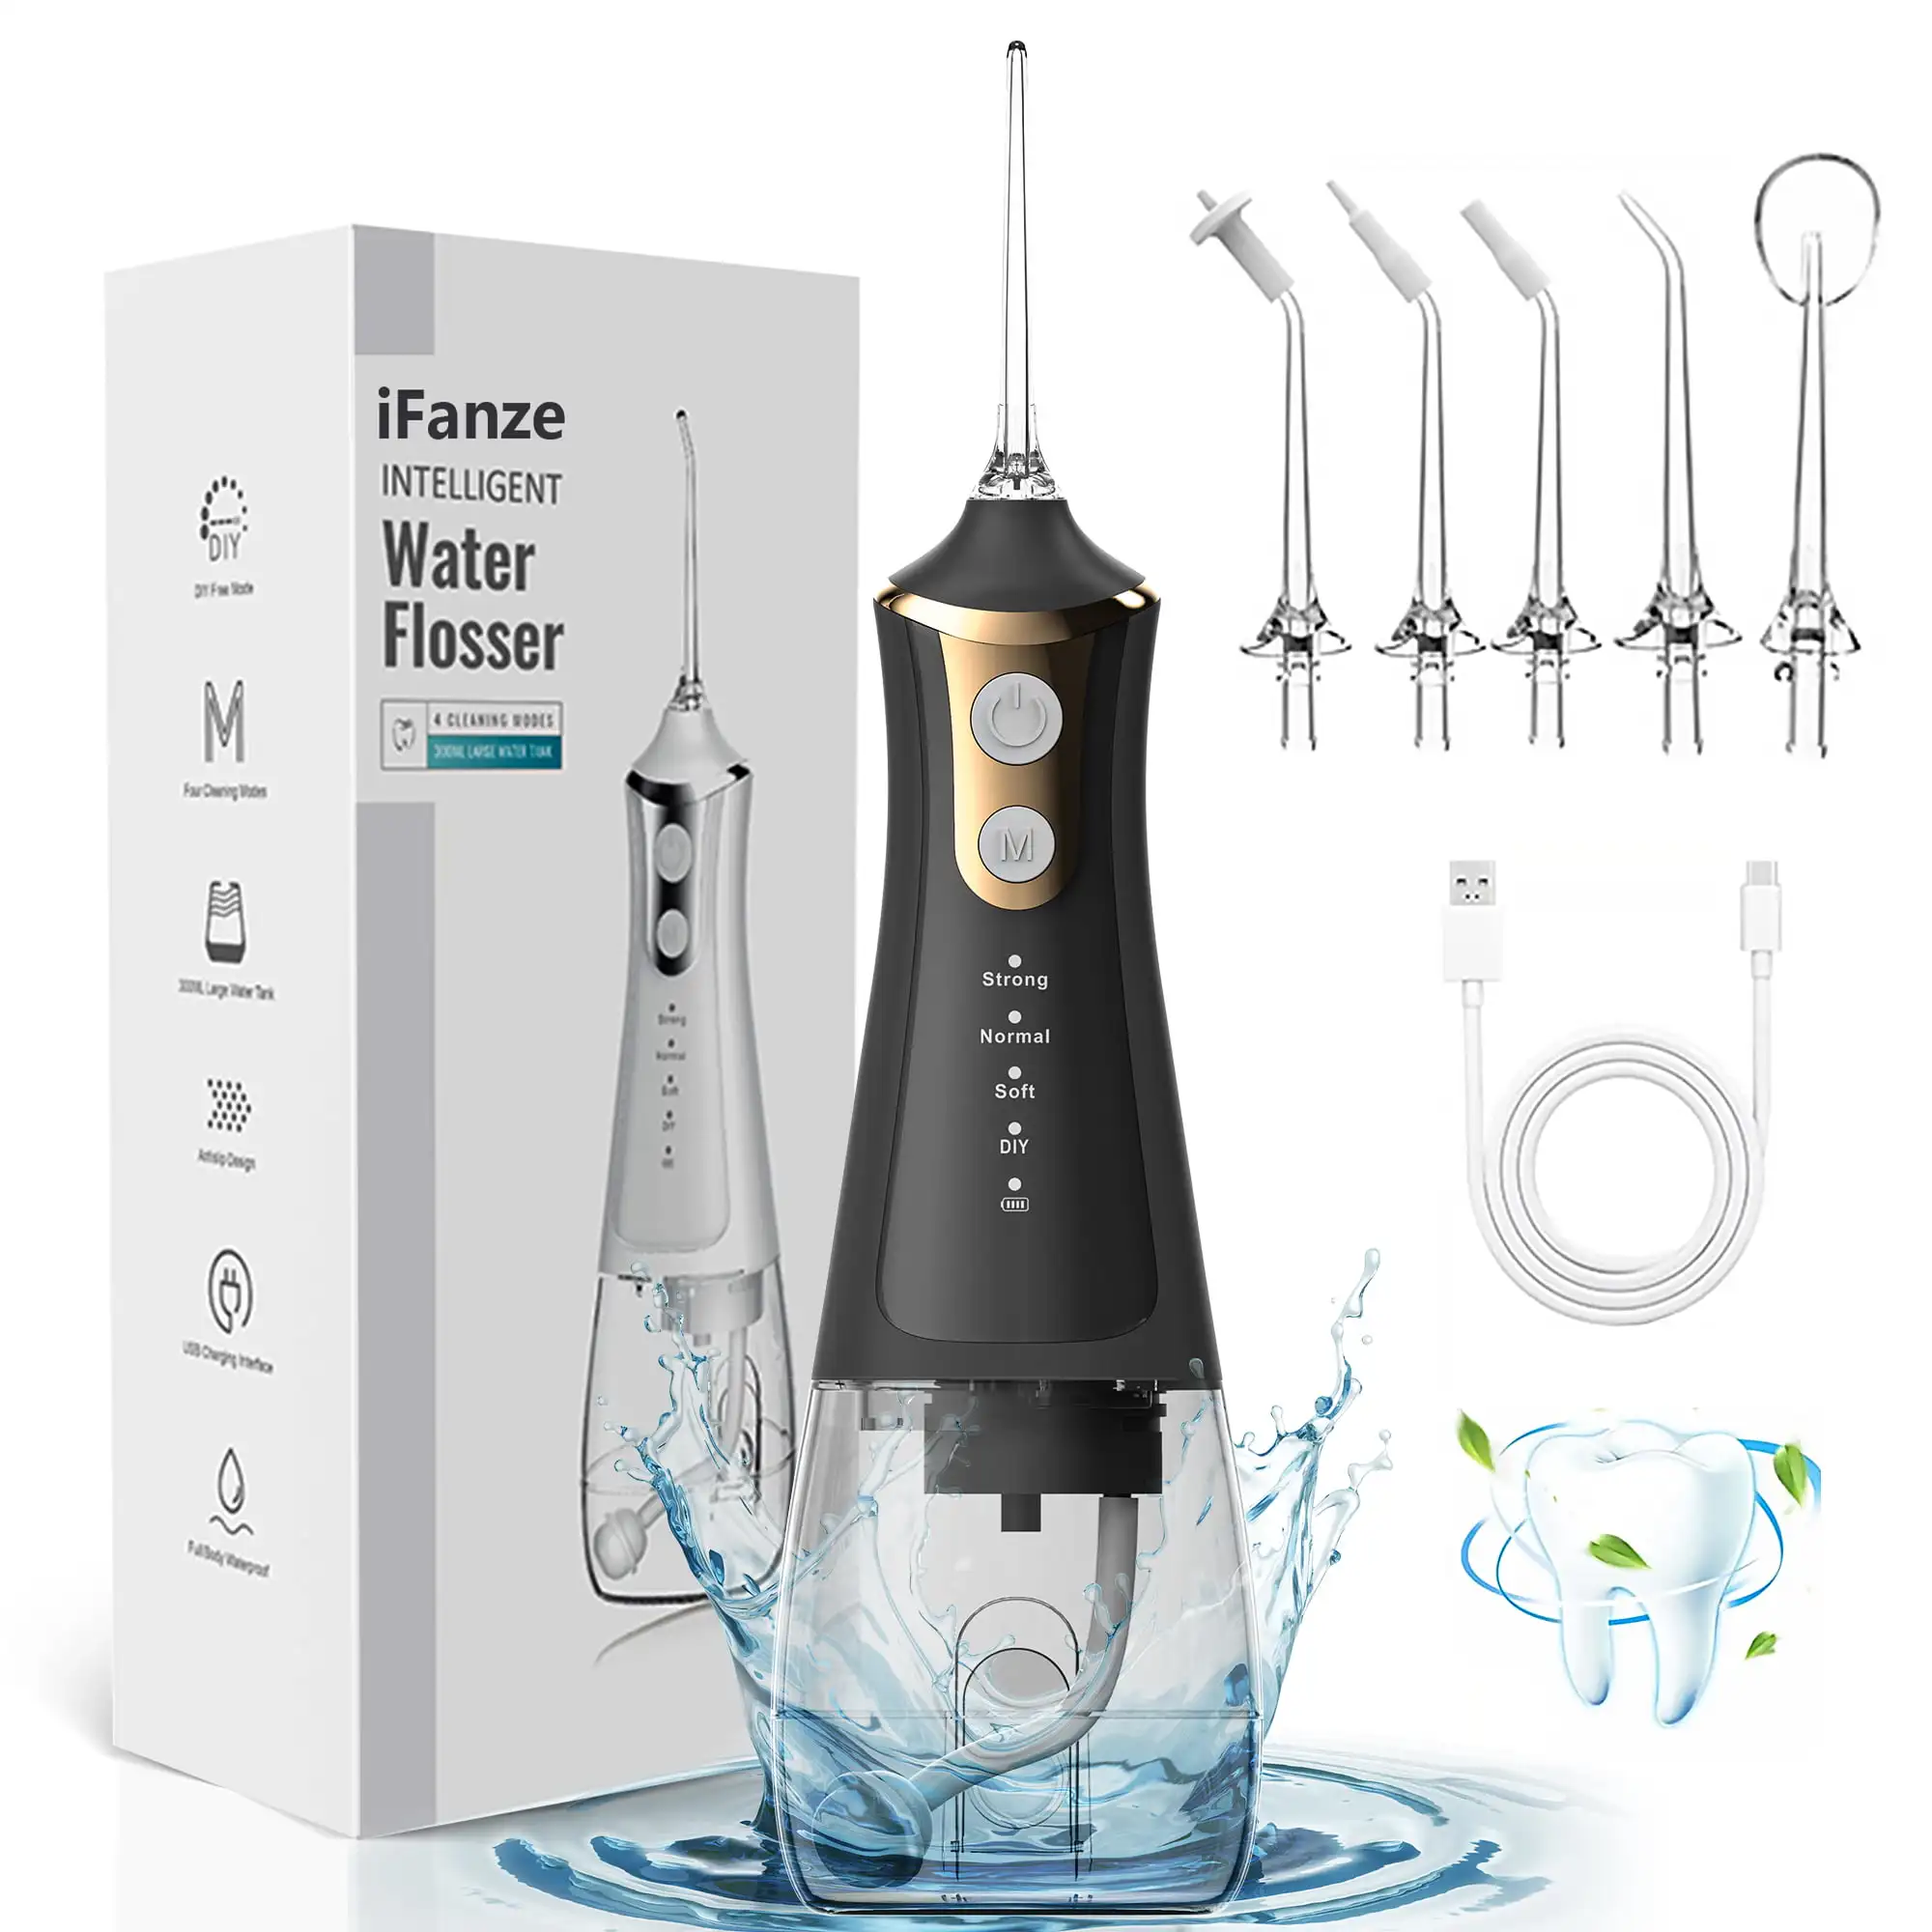 

Cordless Water Flosser for Teeth, Professional Dental Oral Irrigator 4 Modes with 300ml Water Tank, IPX7 Water Flosser Portable